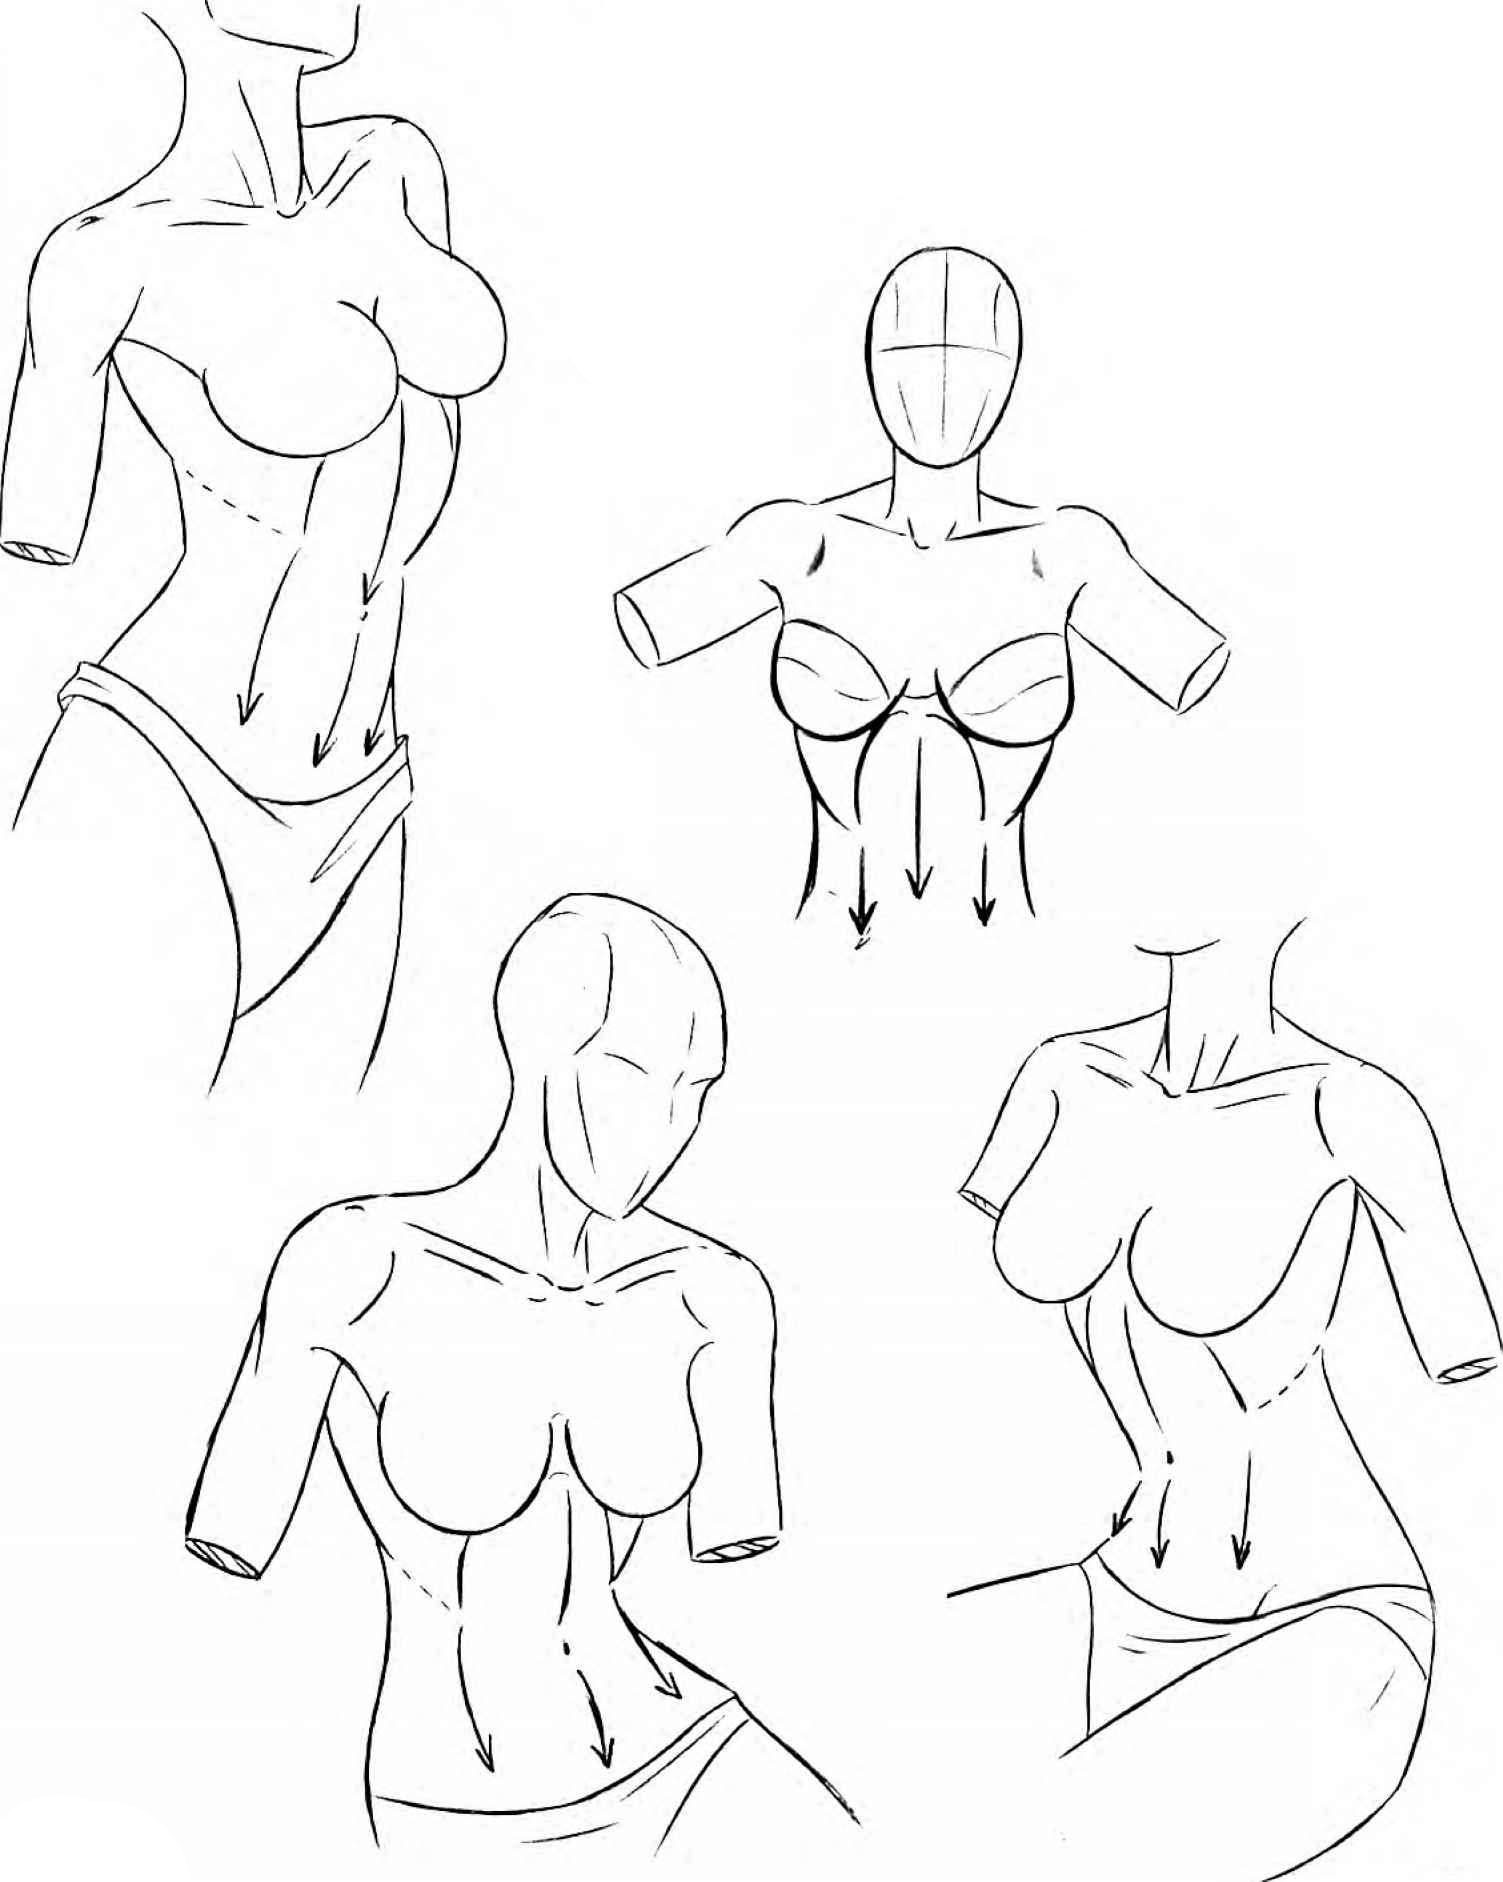 Download These Exercises and Learn How to Draw the Female Body | Domestika